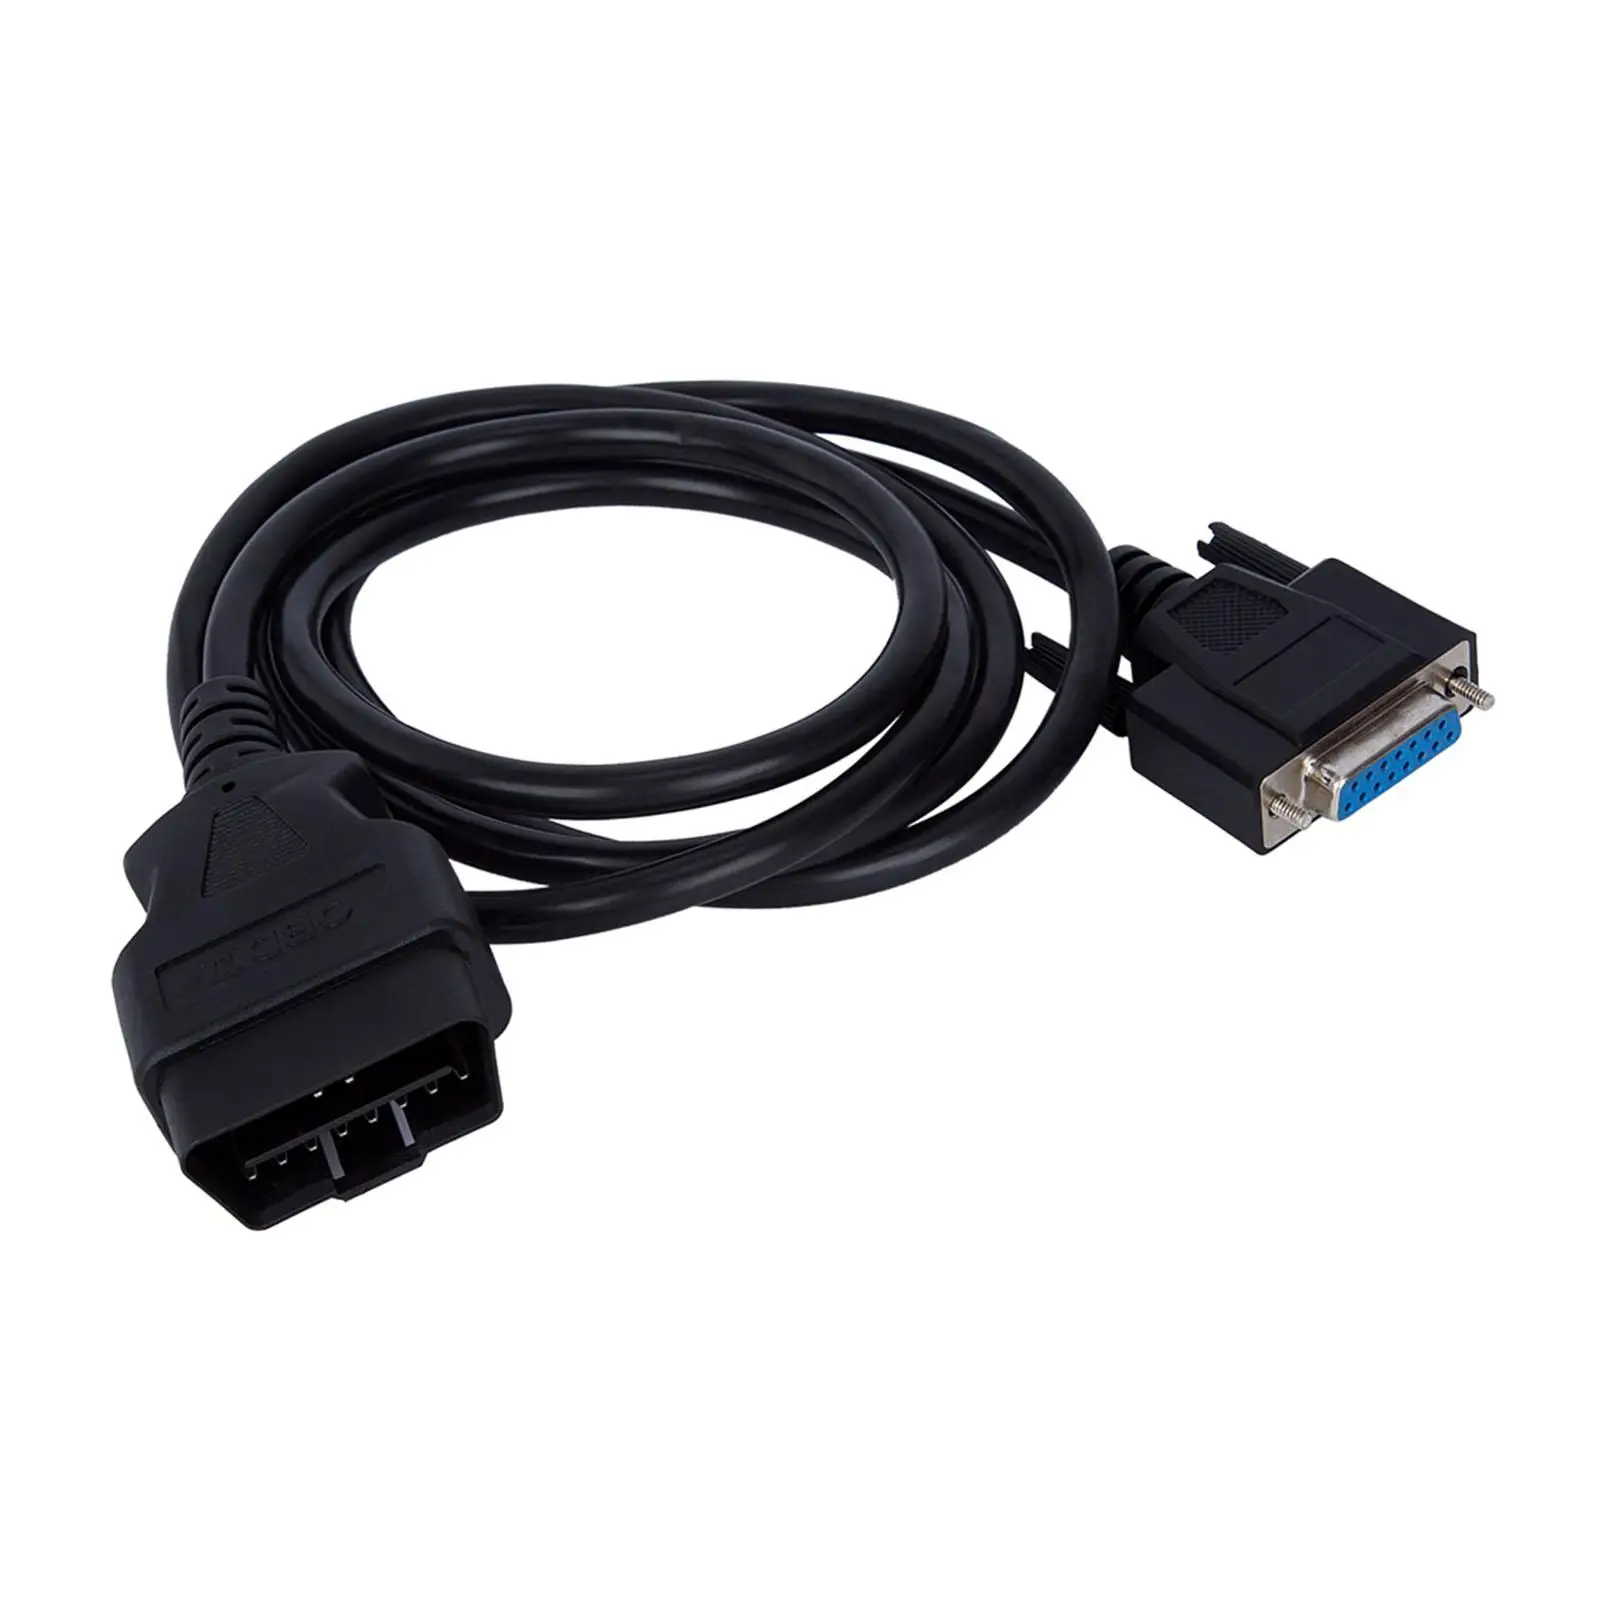 

OBD II OBD2 16 Pin Male to Female Extension Cable OBD 2 to dB15 Male OBDII Cable Diagnostic Extender Cord Adapter Adapter Cable